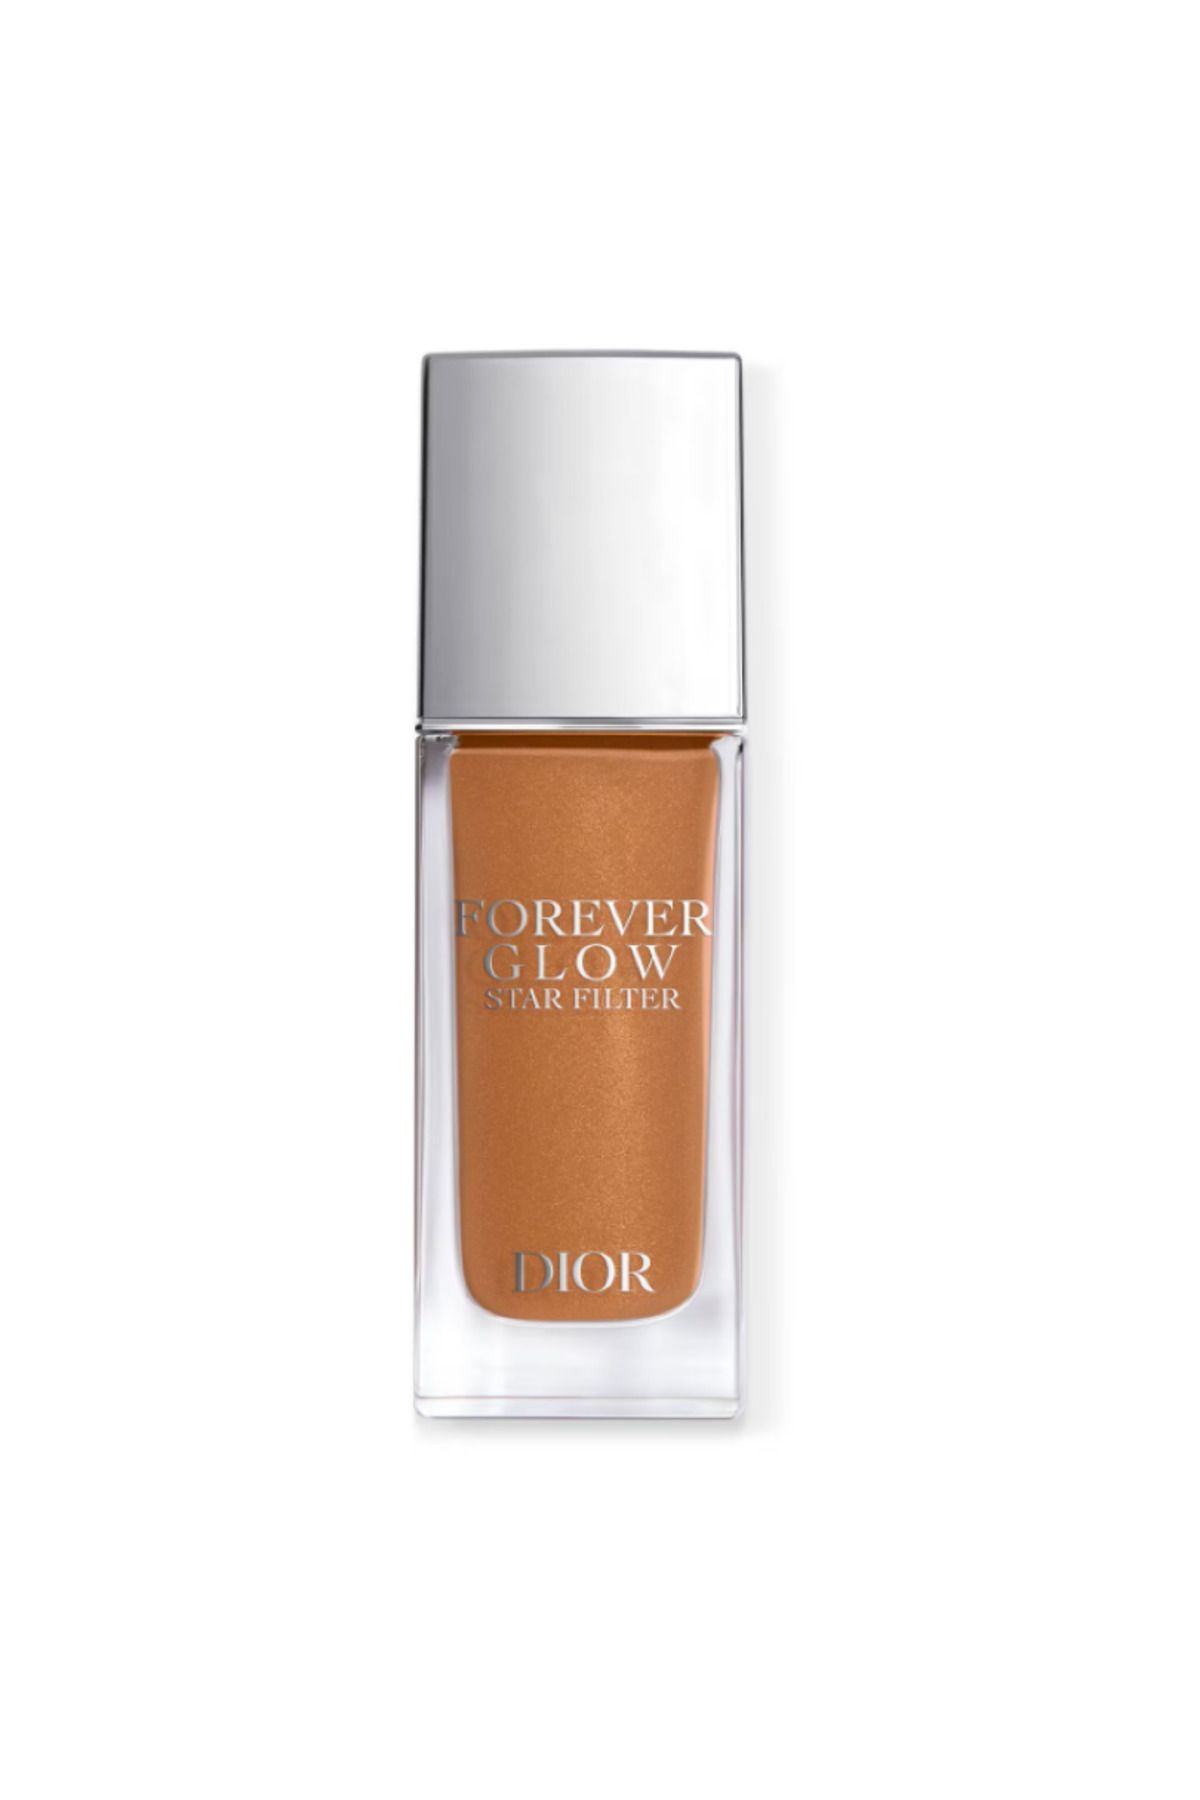 Dior Forever Glow Star Filter - Complexion Sublimating Fluid and Highlighter 30 ml